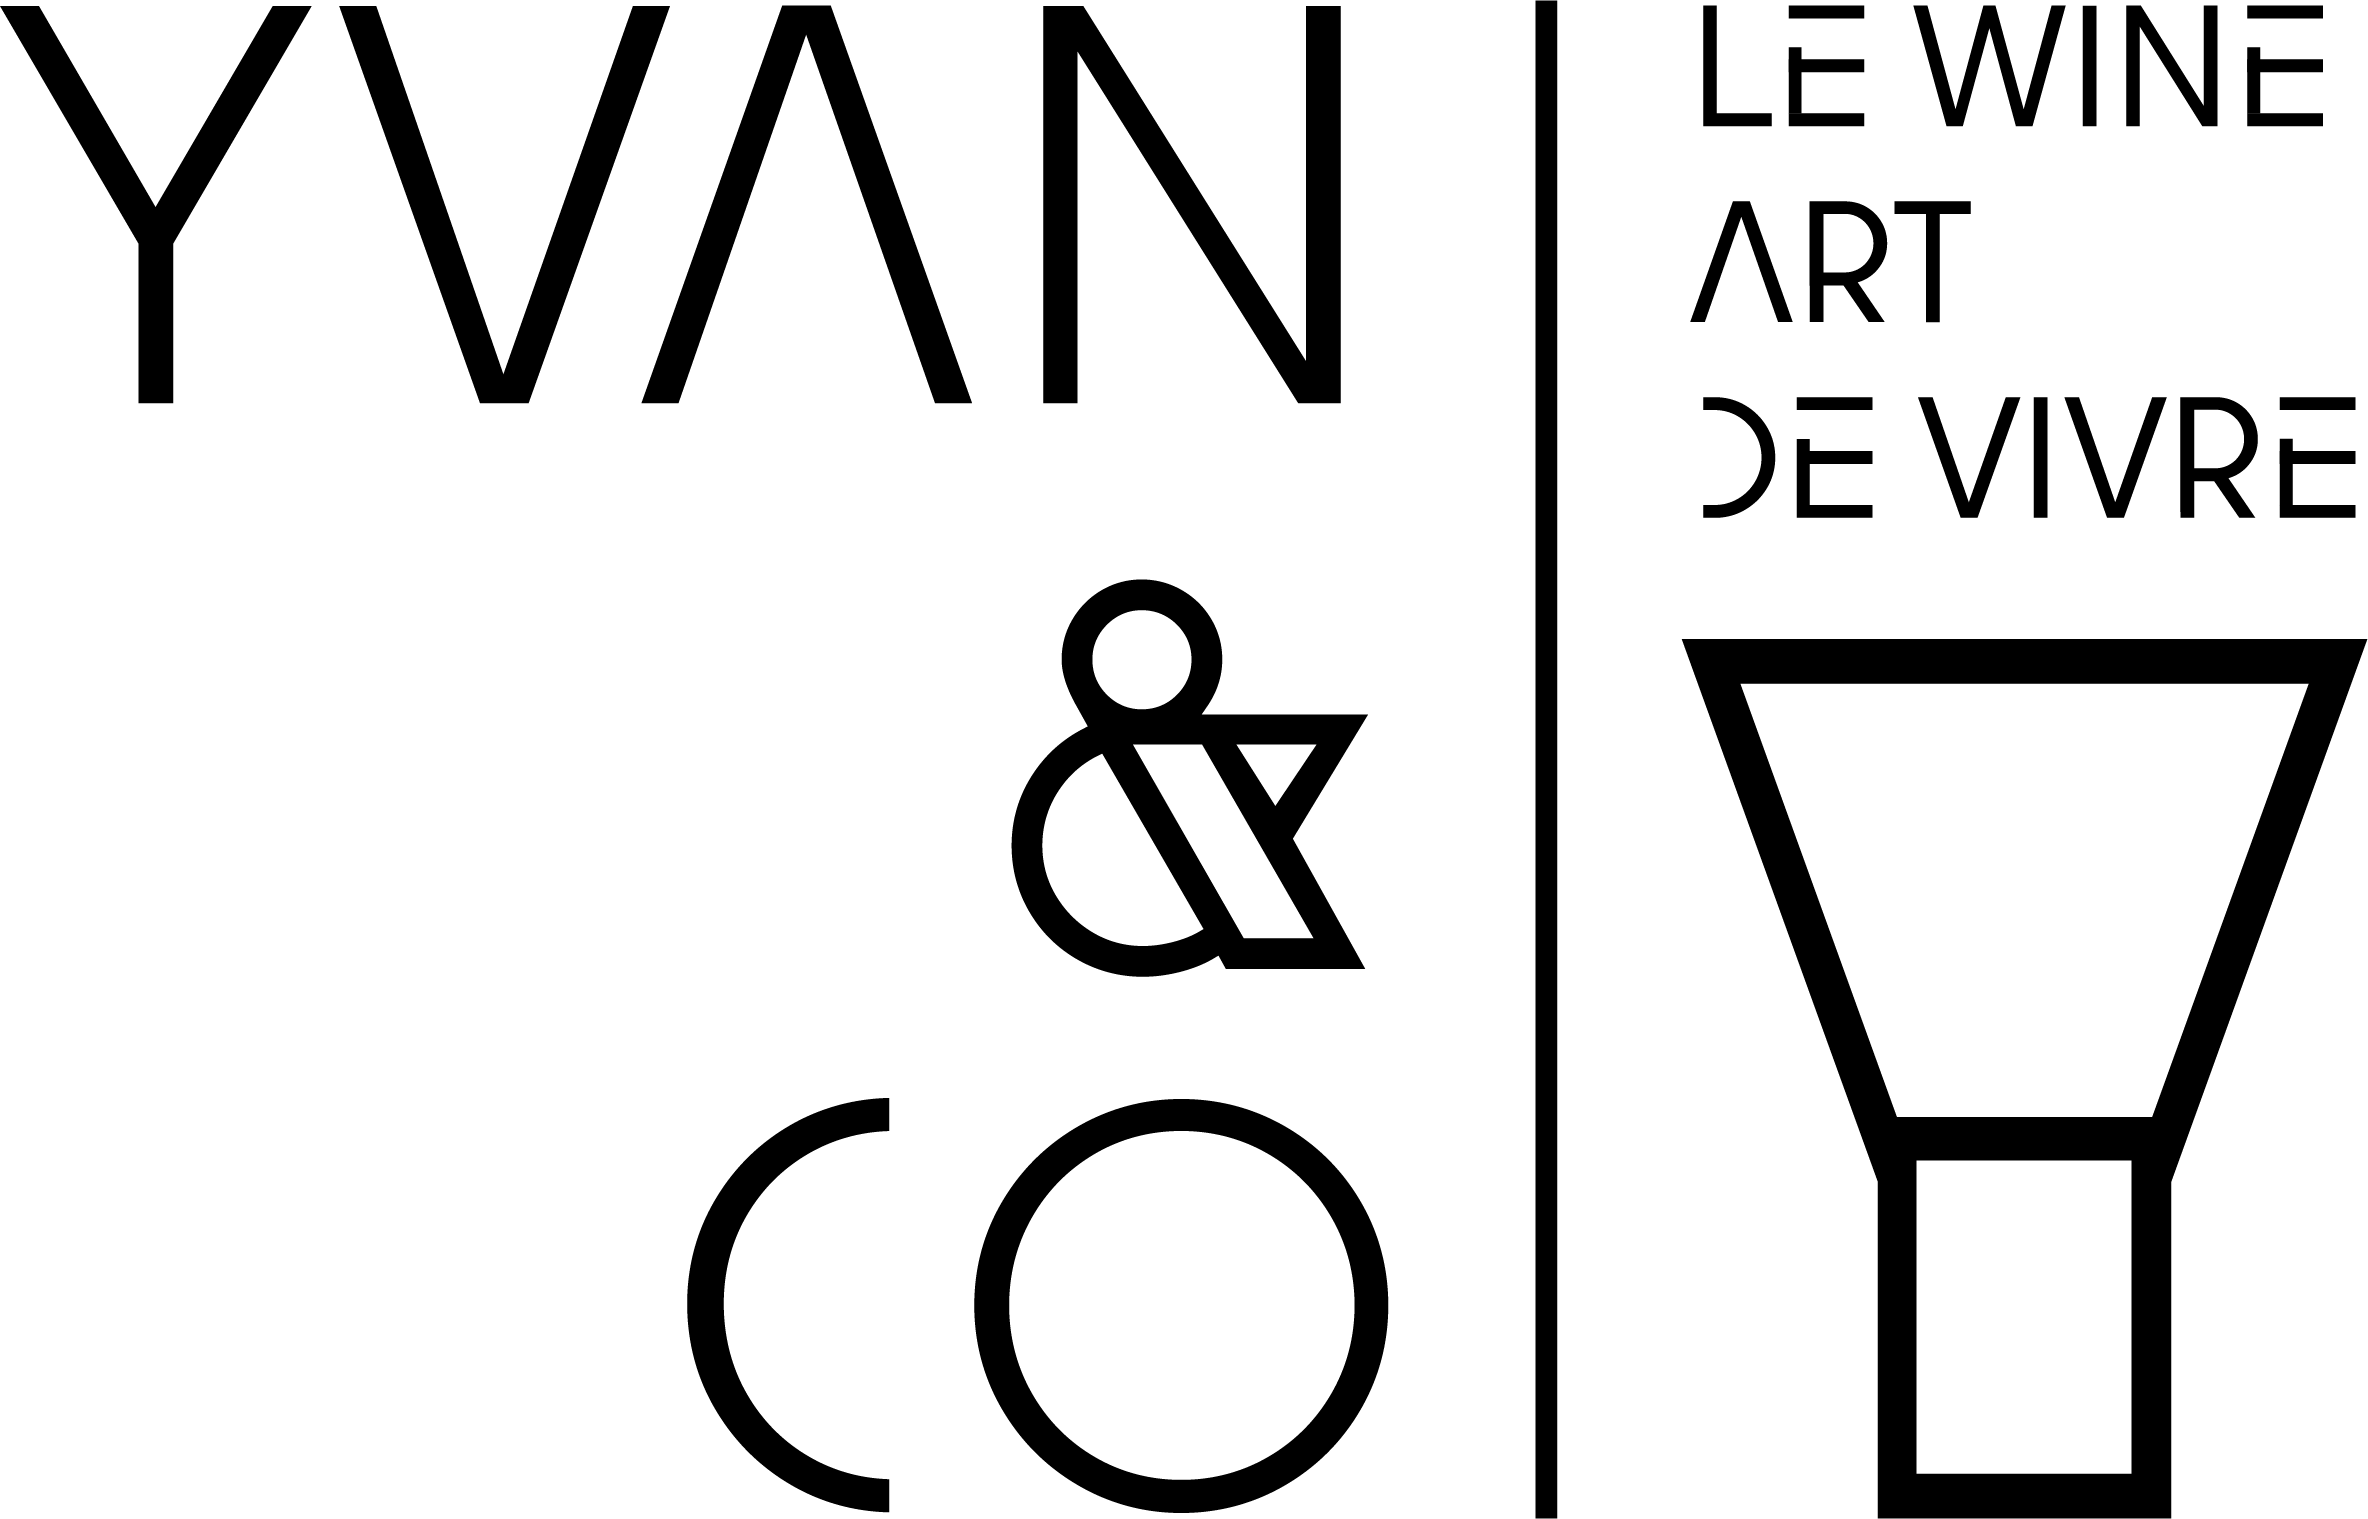 LOGO YVAN AND CO - COMPLET FOND CLAIR